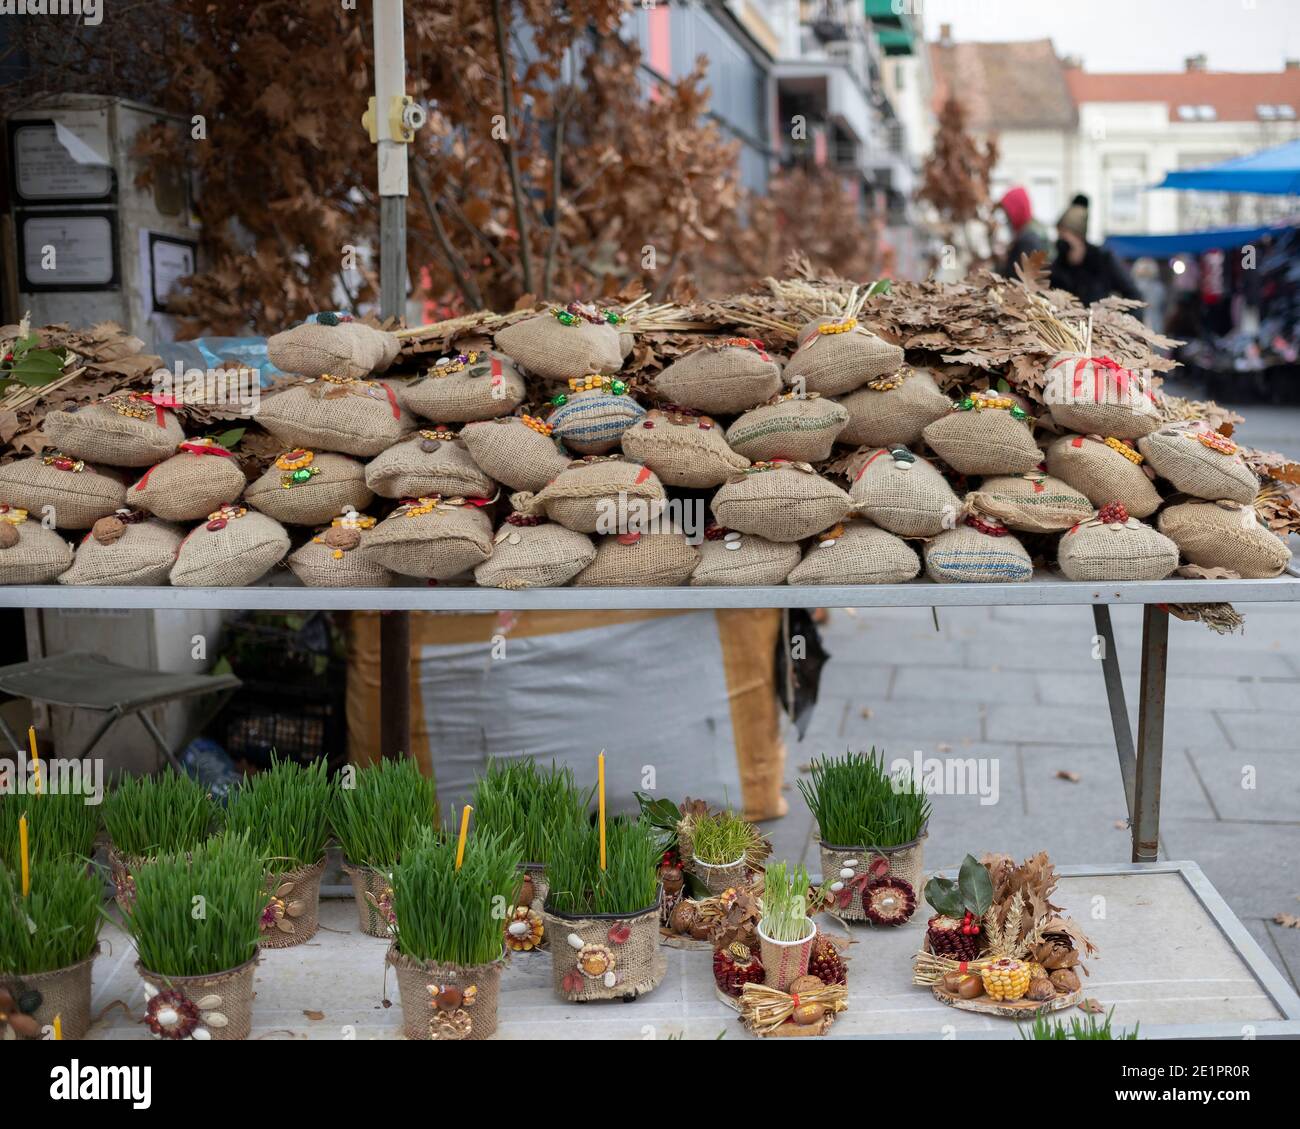 Belgrade, Serbia, Jan 6, 2021: Street stall with traditional Eastern Orthodox Christmas (7th Jan) ornaments Stock Photo